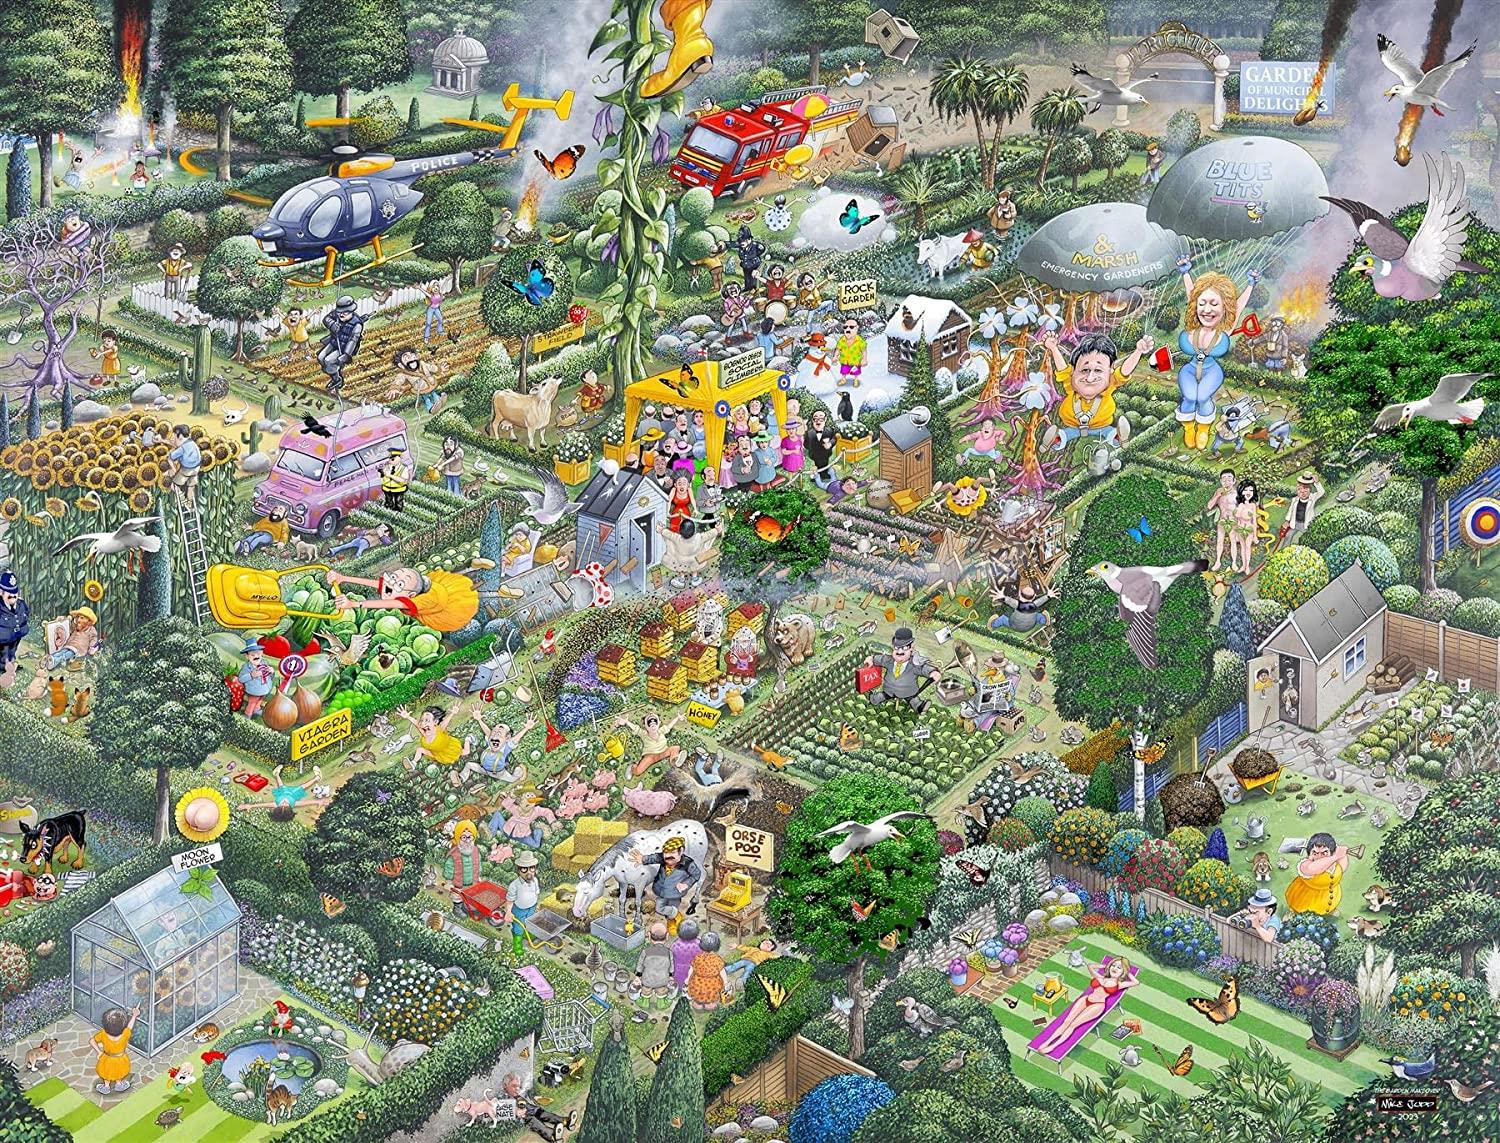 I Love Gardening, Mike Jupp Jigsaw Puzzle (1000 Pieces)